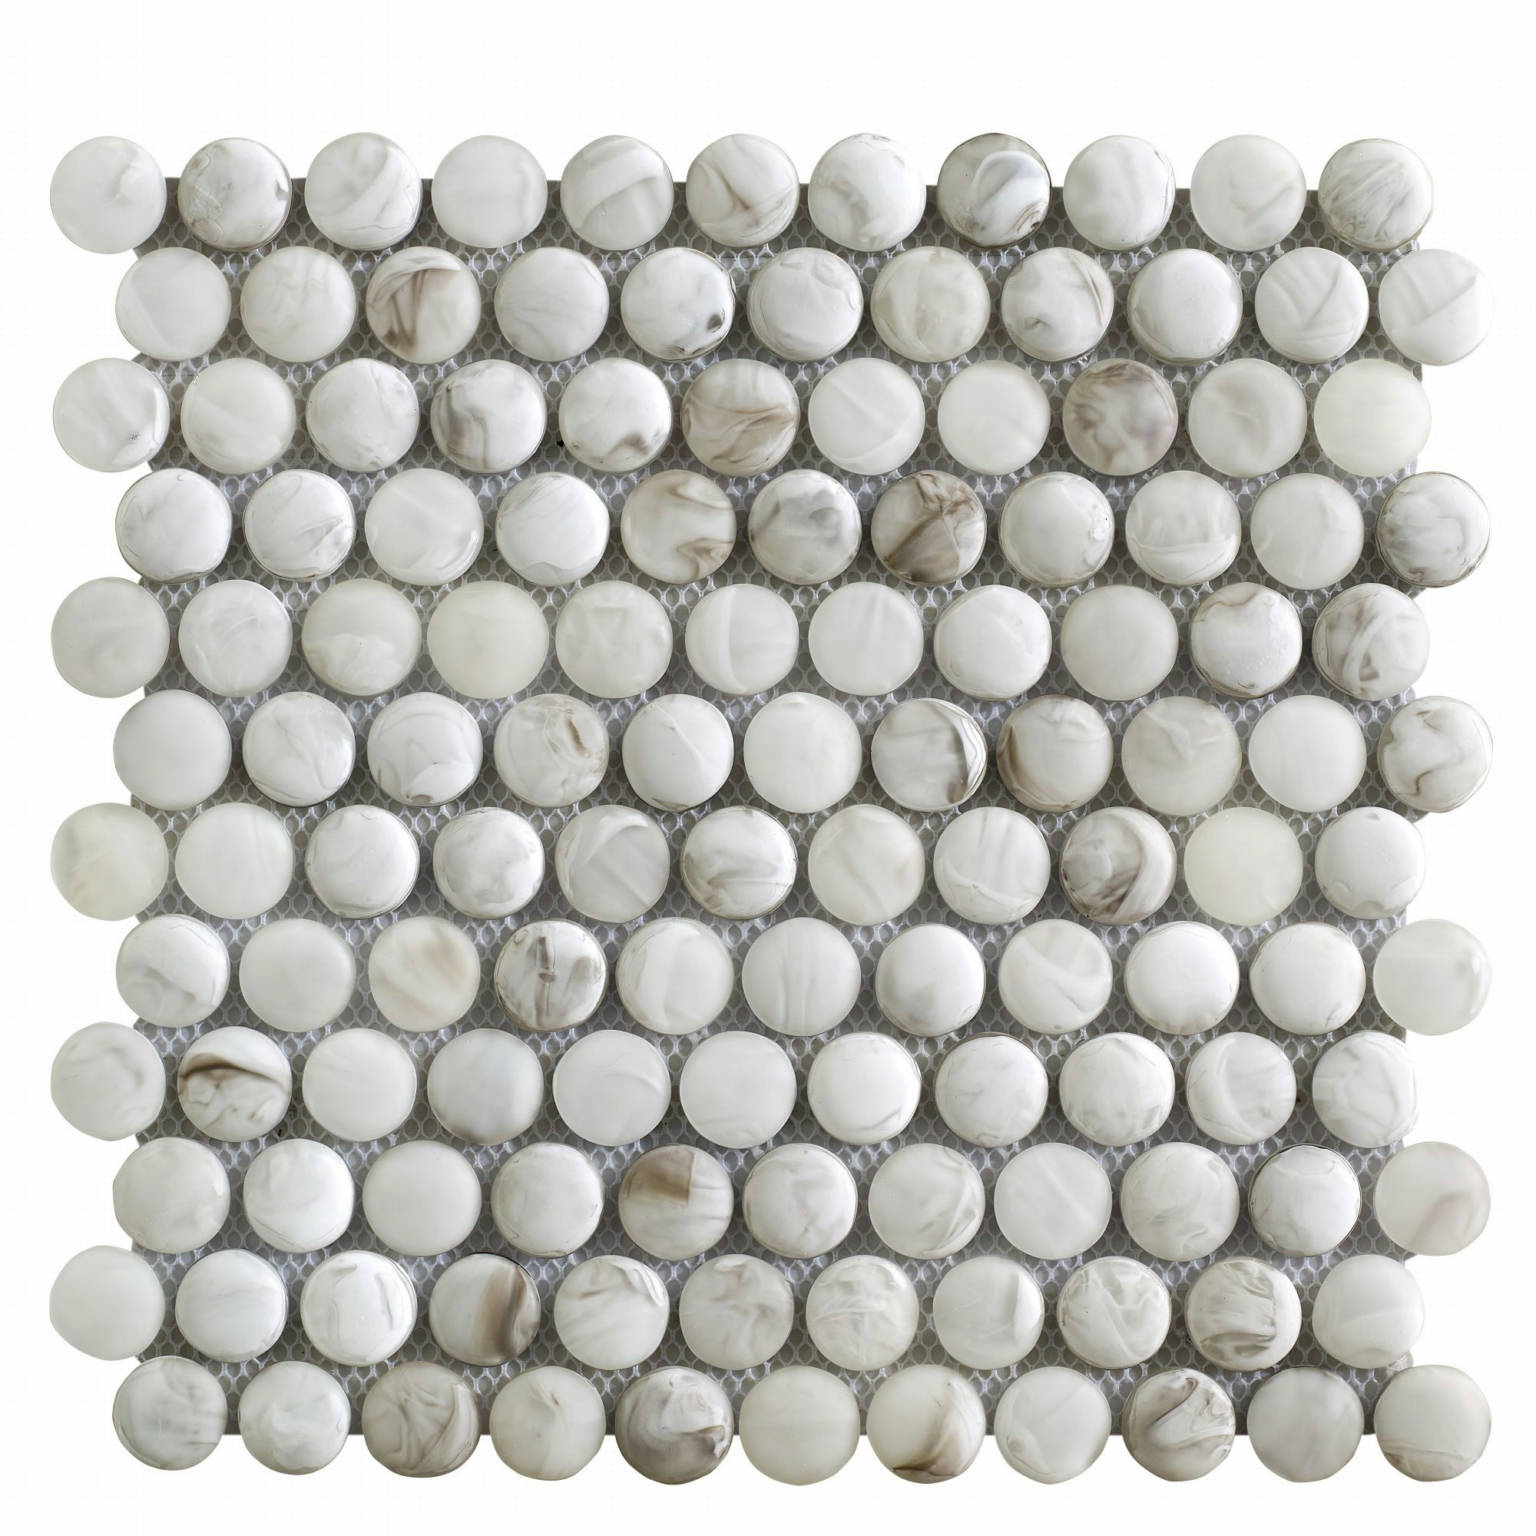 Danube | Stones And More | Finest selection of Mosaics, Glass, Tile and Stone